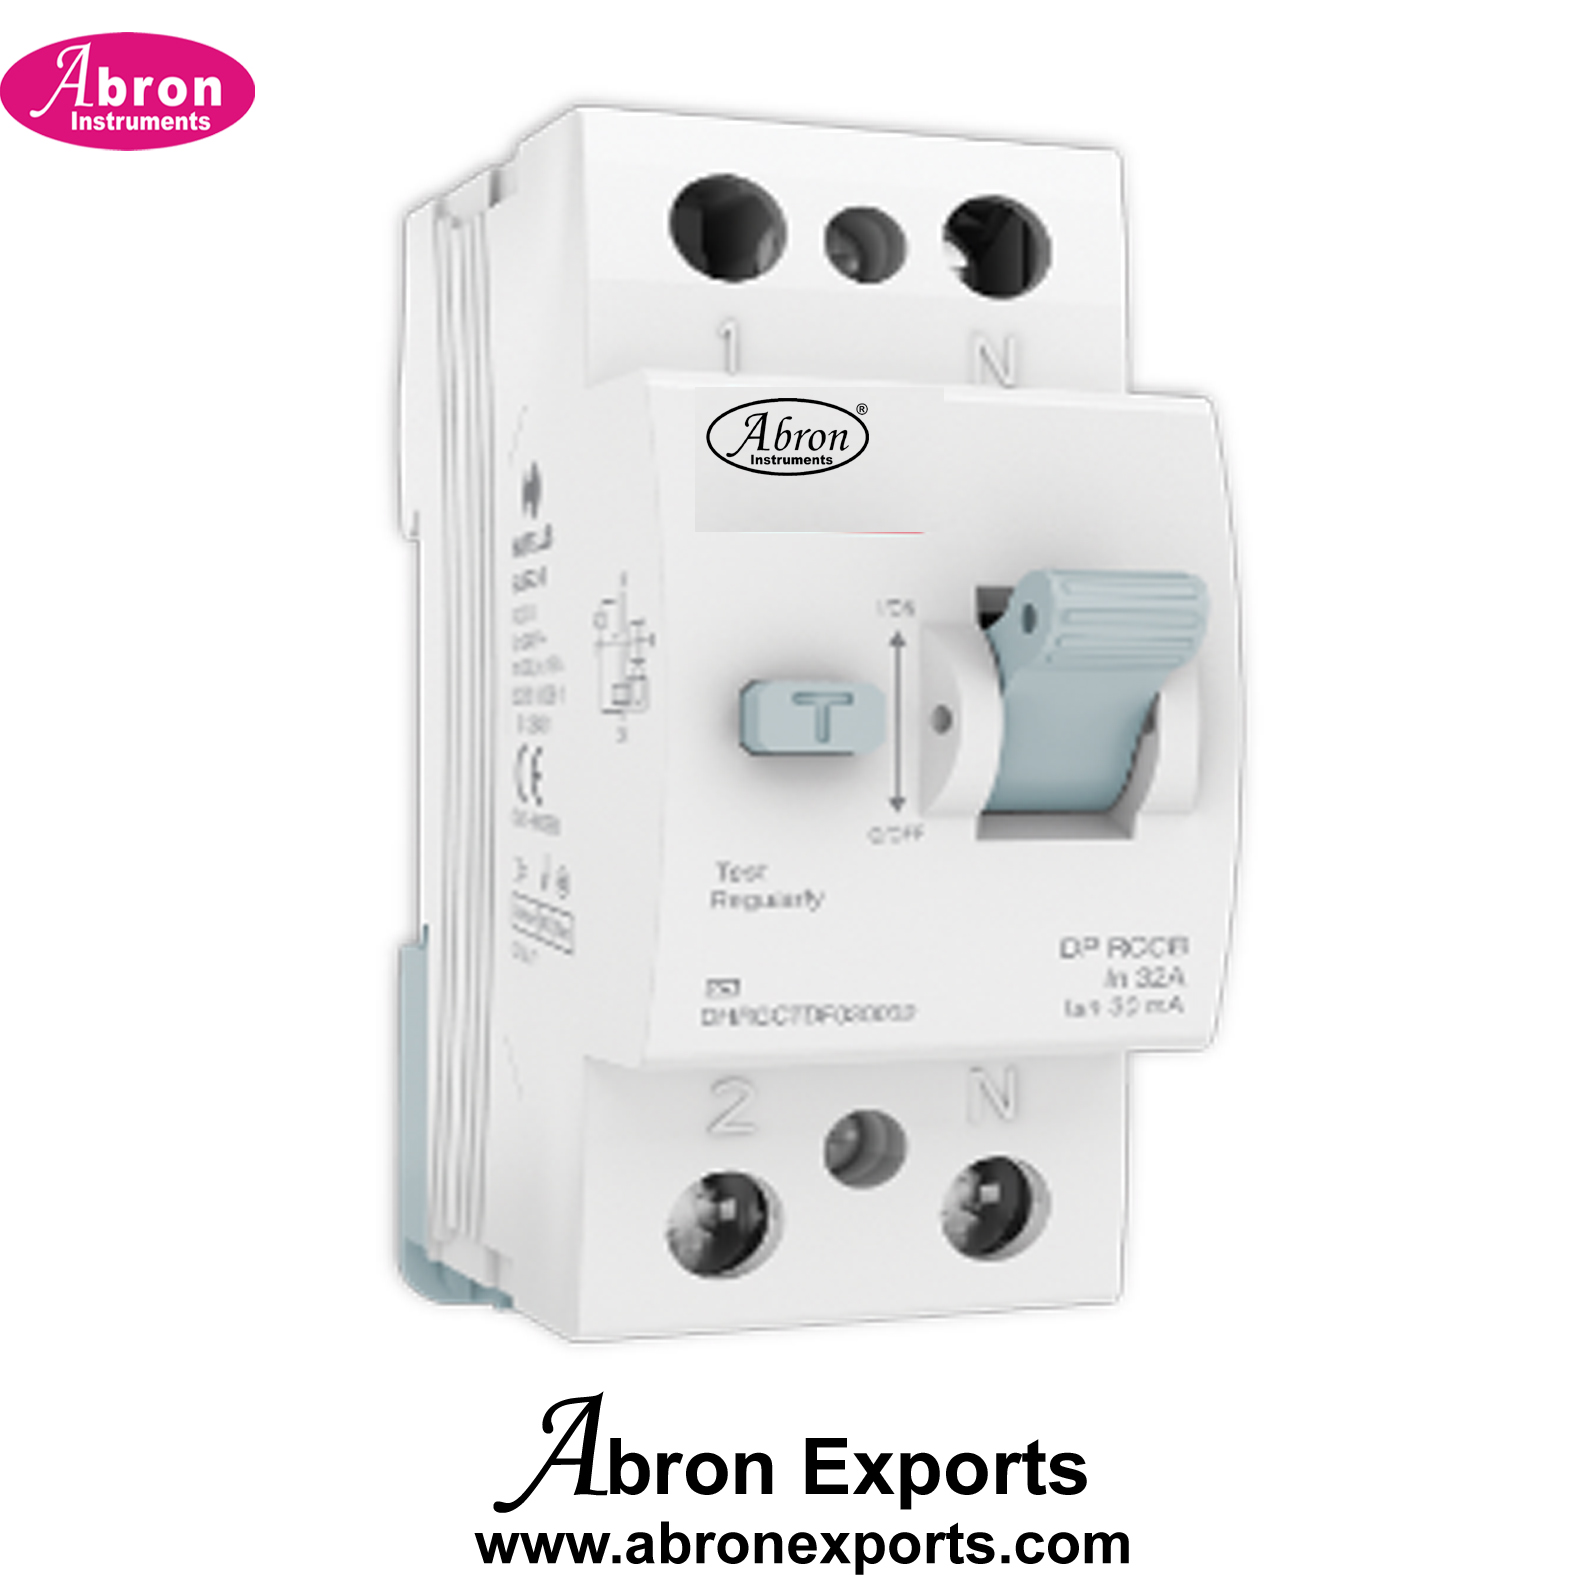 Electric Breaker Anti Electric Shock For Human Safety 32A for Lab Circuit Abron AE-1255BSH 